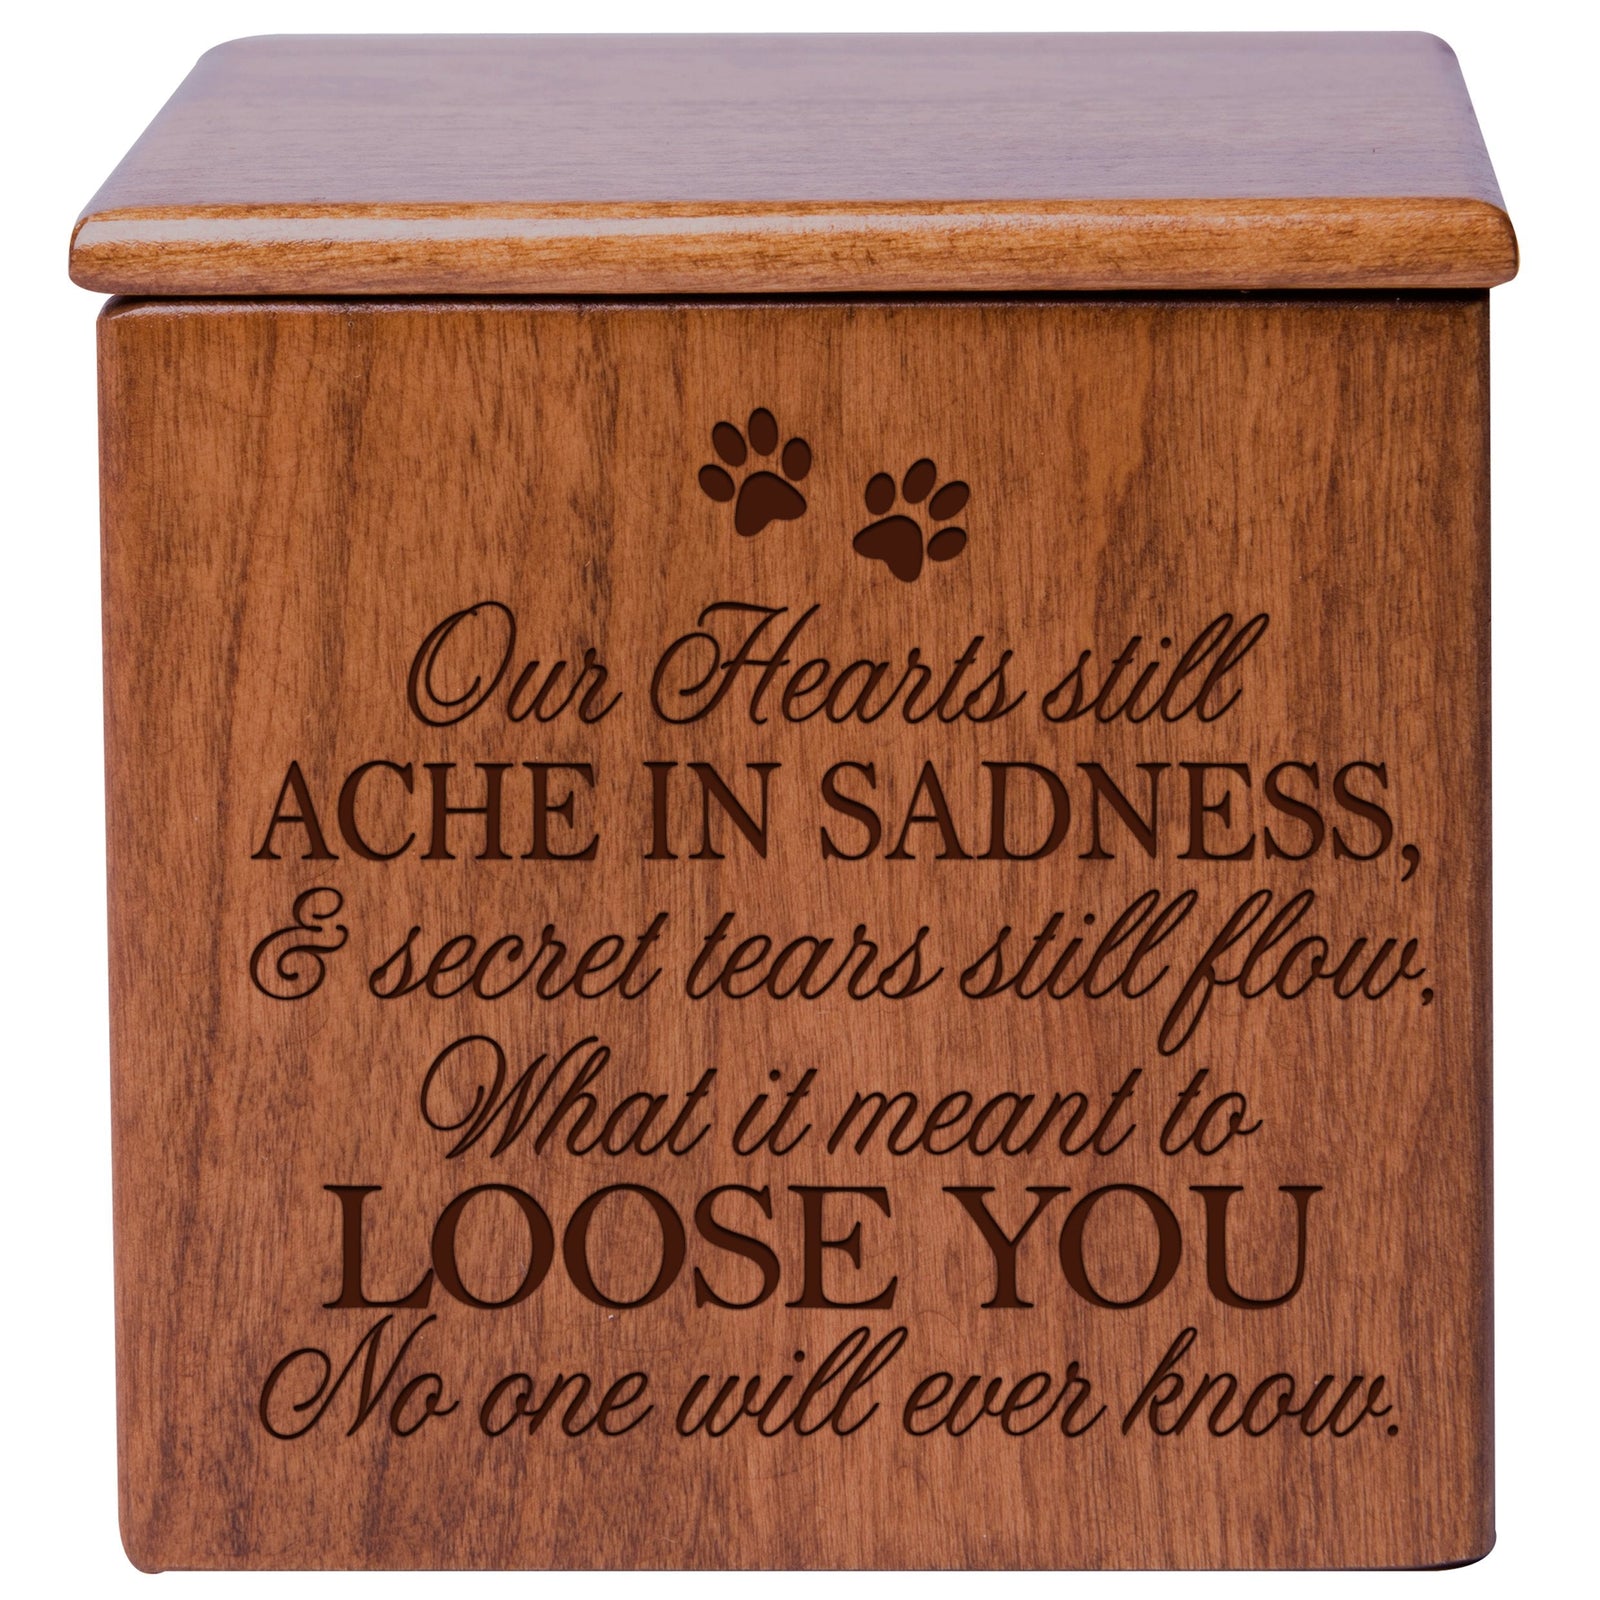 Cherry Pet Memorial 3.5x3.5 Keepsake Urn with phrase "Our Hearts Still Ache In Sadness"